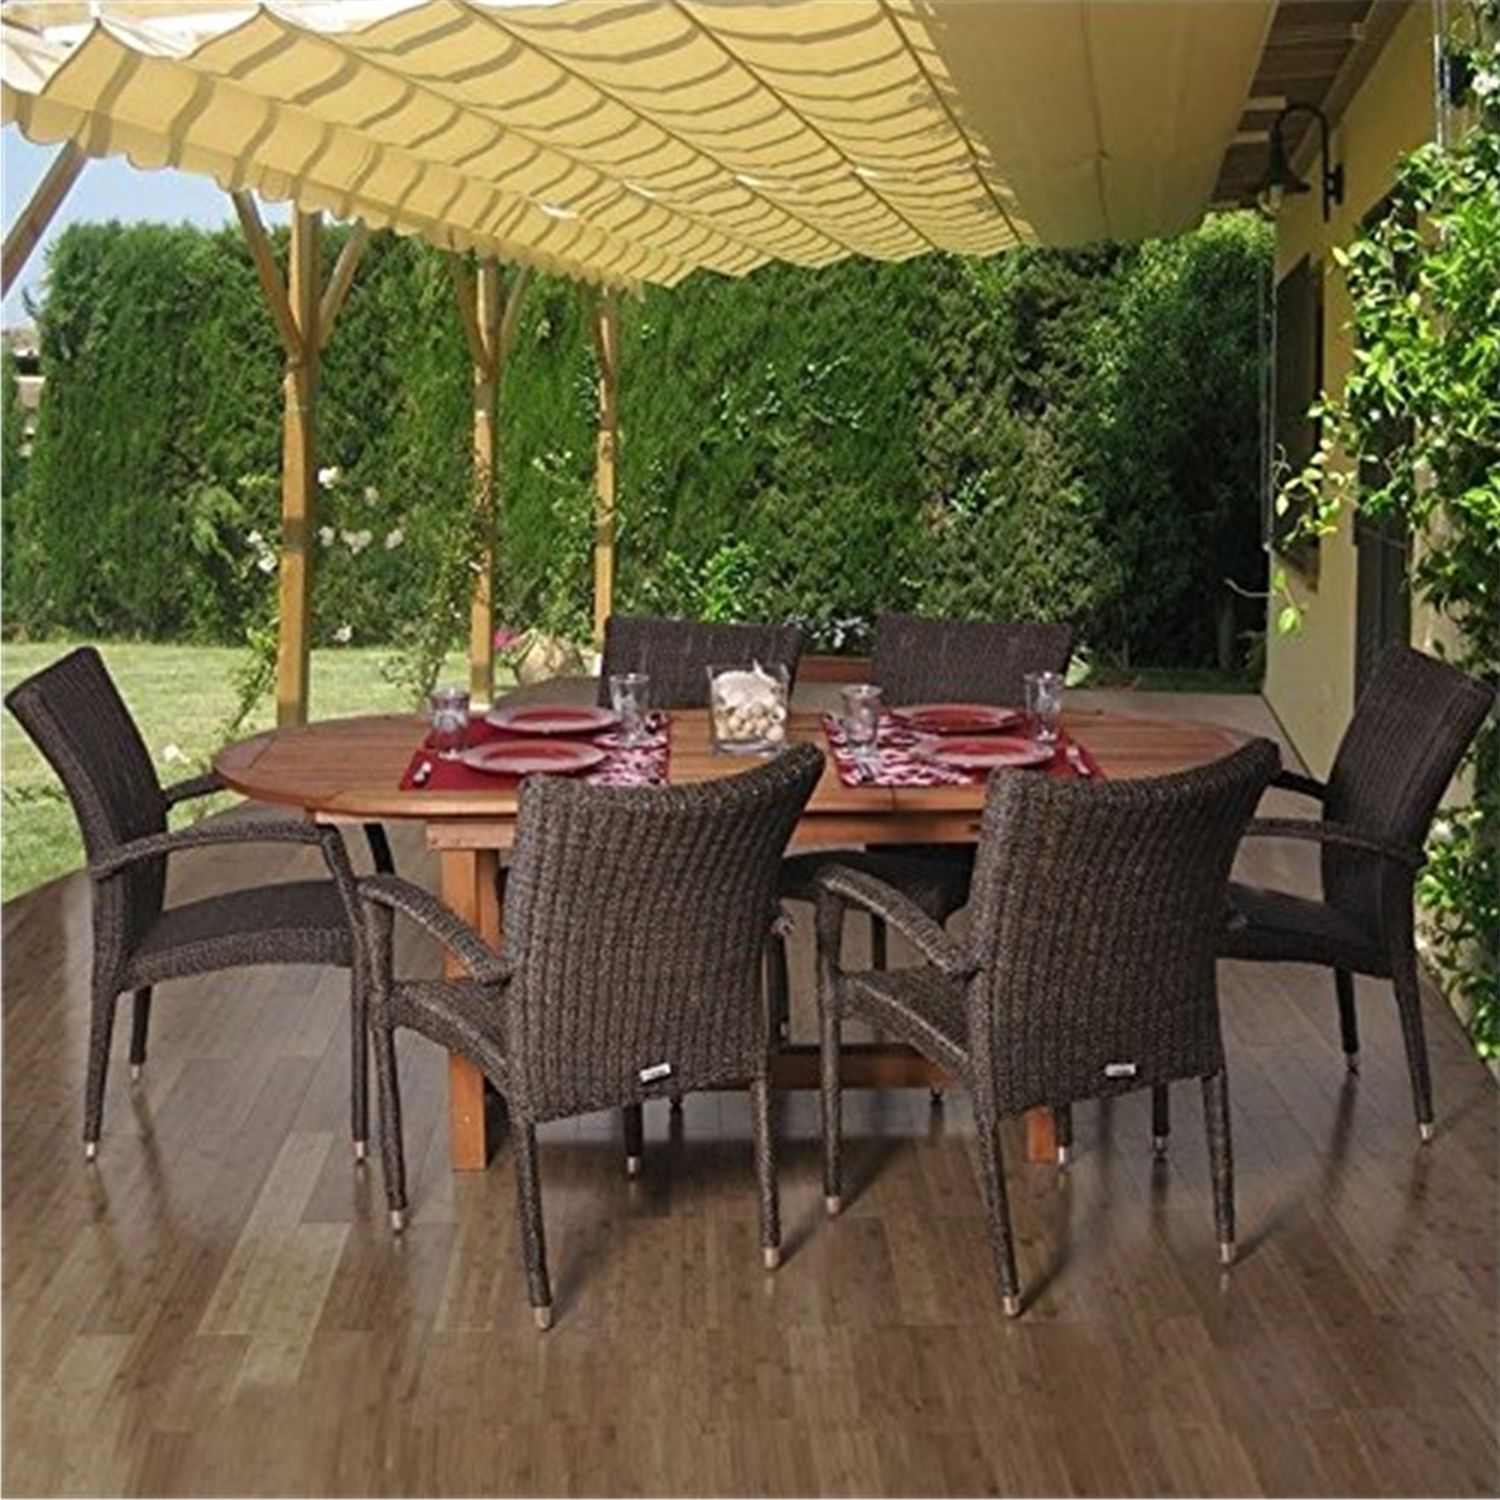 Extendable 7 Piece Patio Dining Sets Intended For 2020 Lemans Deluxe 7 Piece Eucalyptus/wicker Extendable Oval Patio Dining (View 1 of 15)